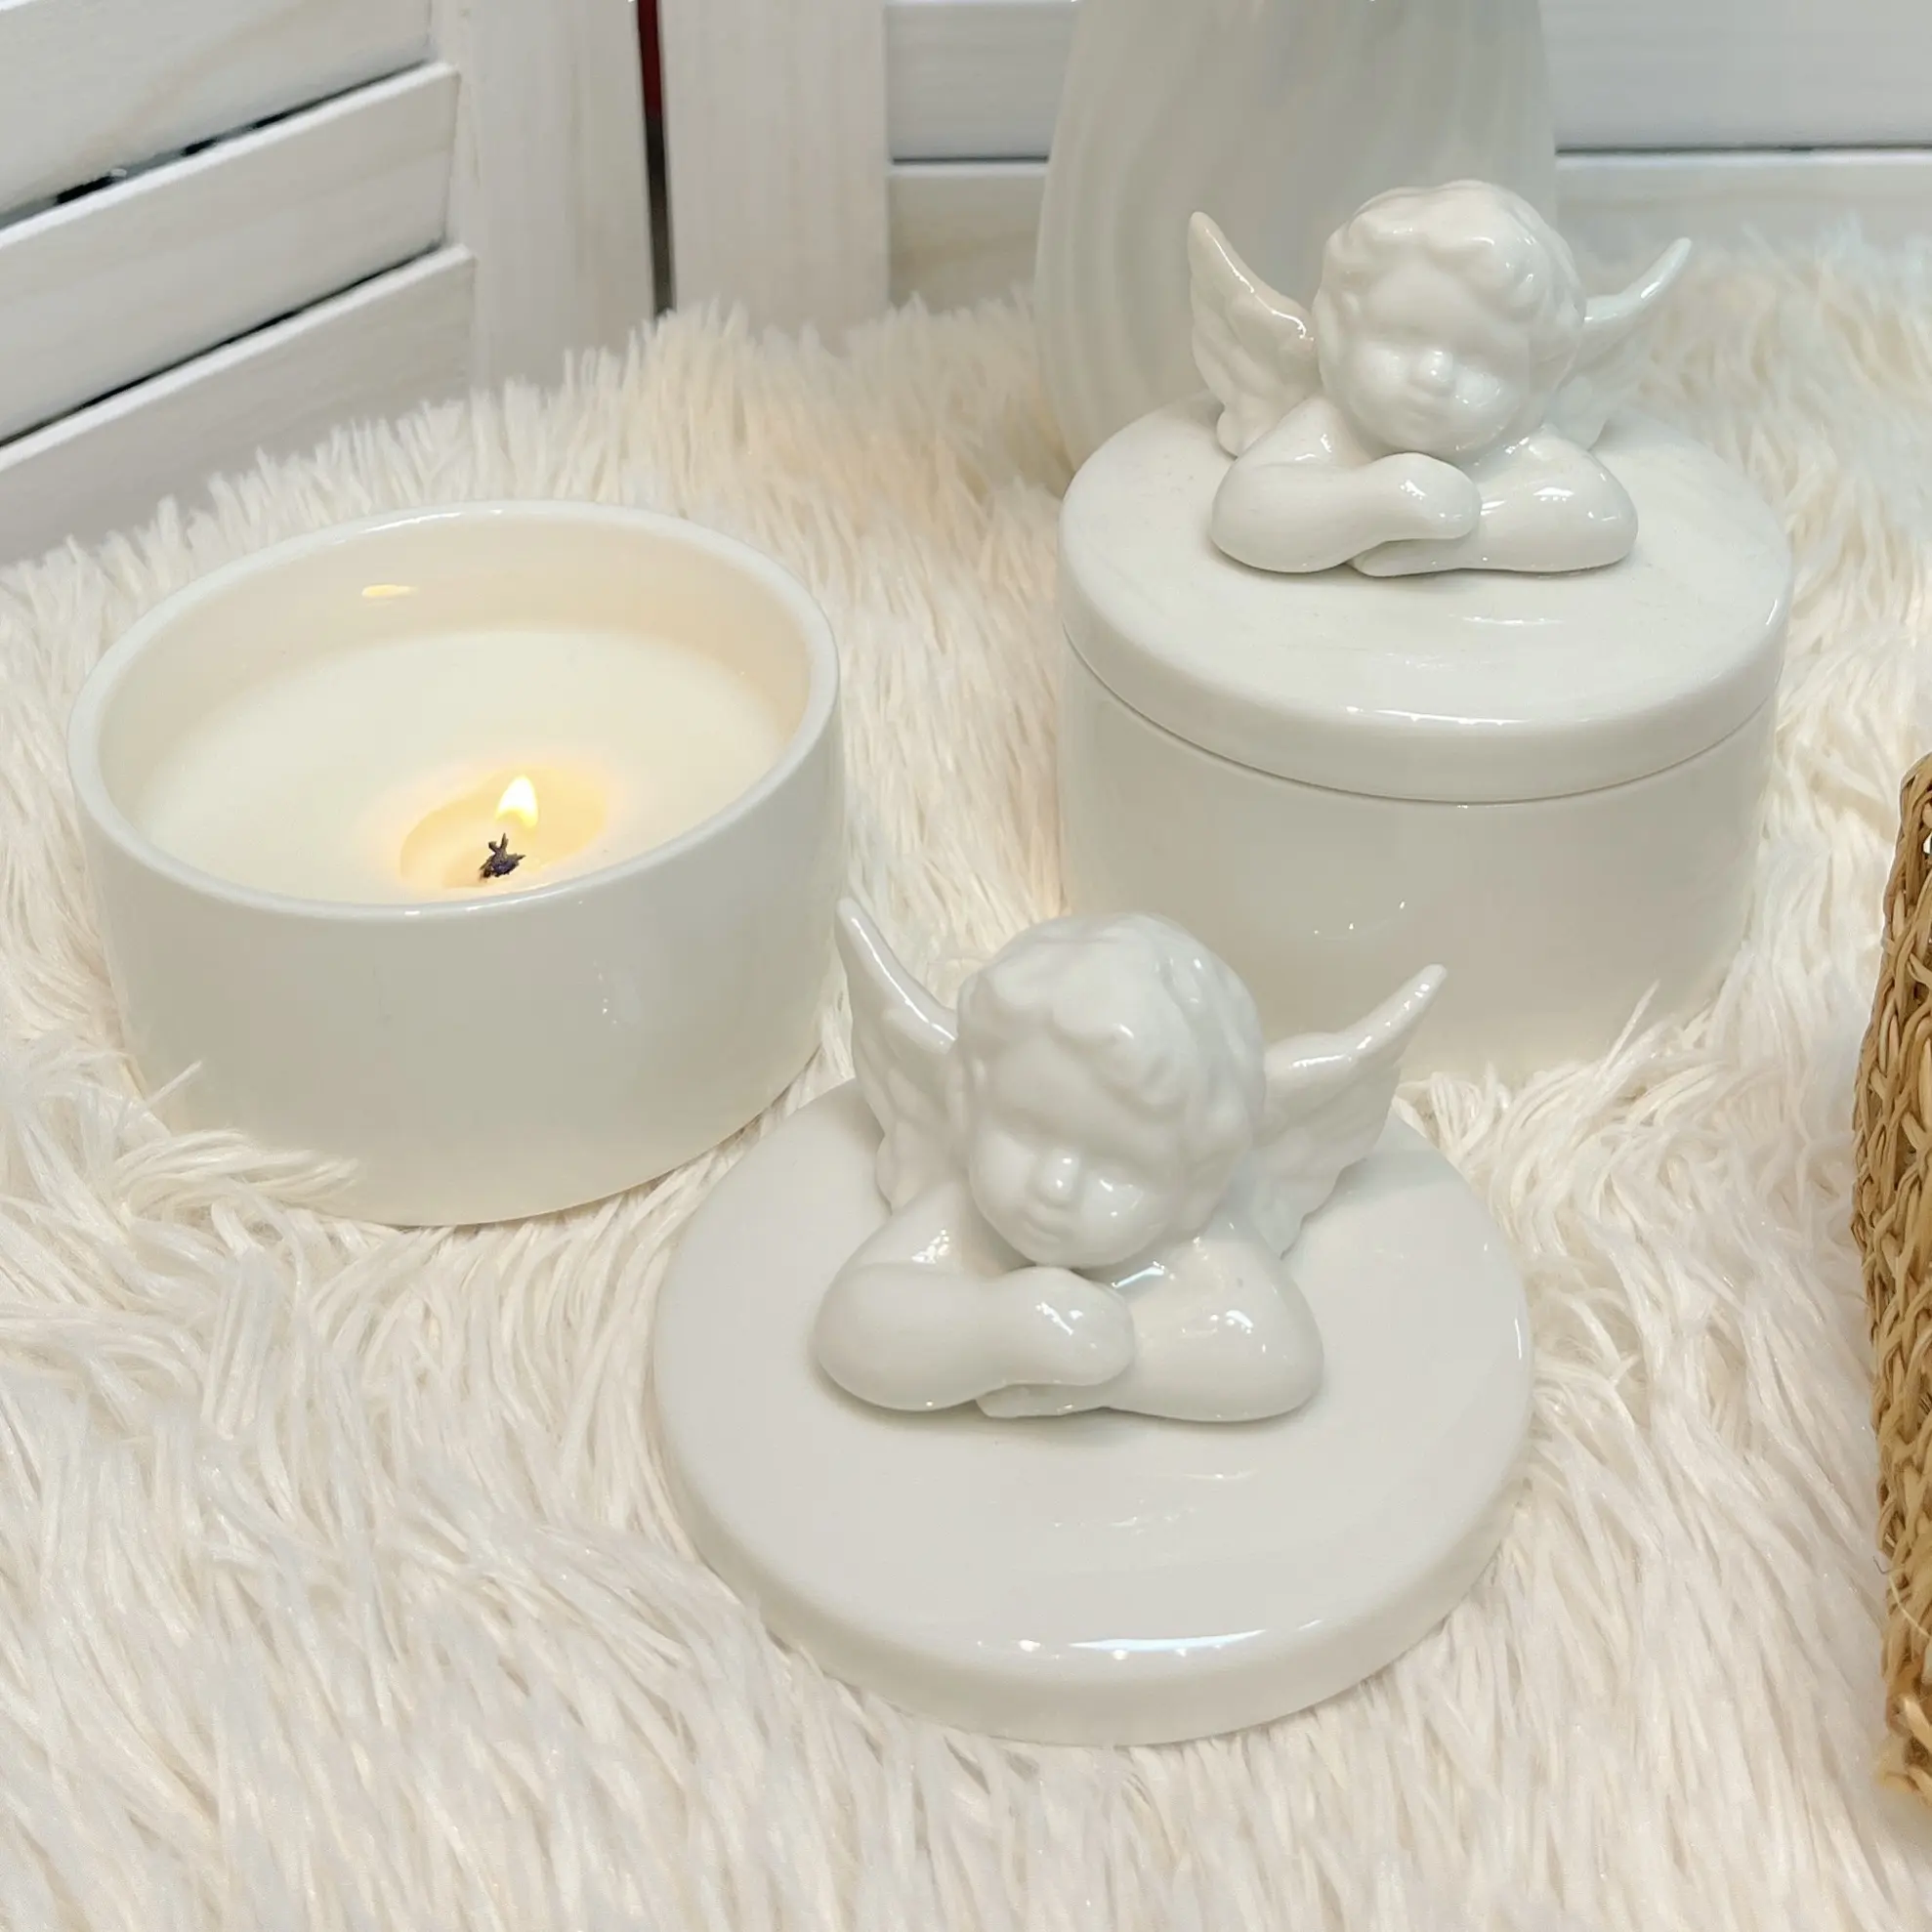 2023 Popular Instagram Style Cute Angel Lid Concrete Cement Vessel Home Decor Bougie Personalise Soy Wax Scented Candle